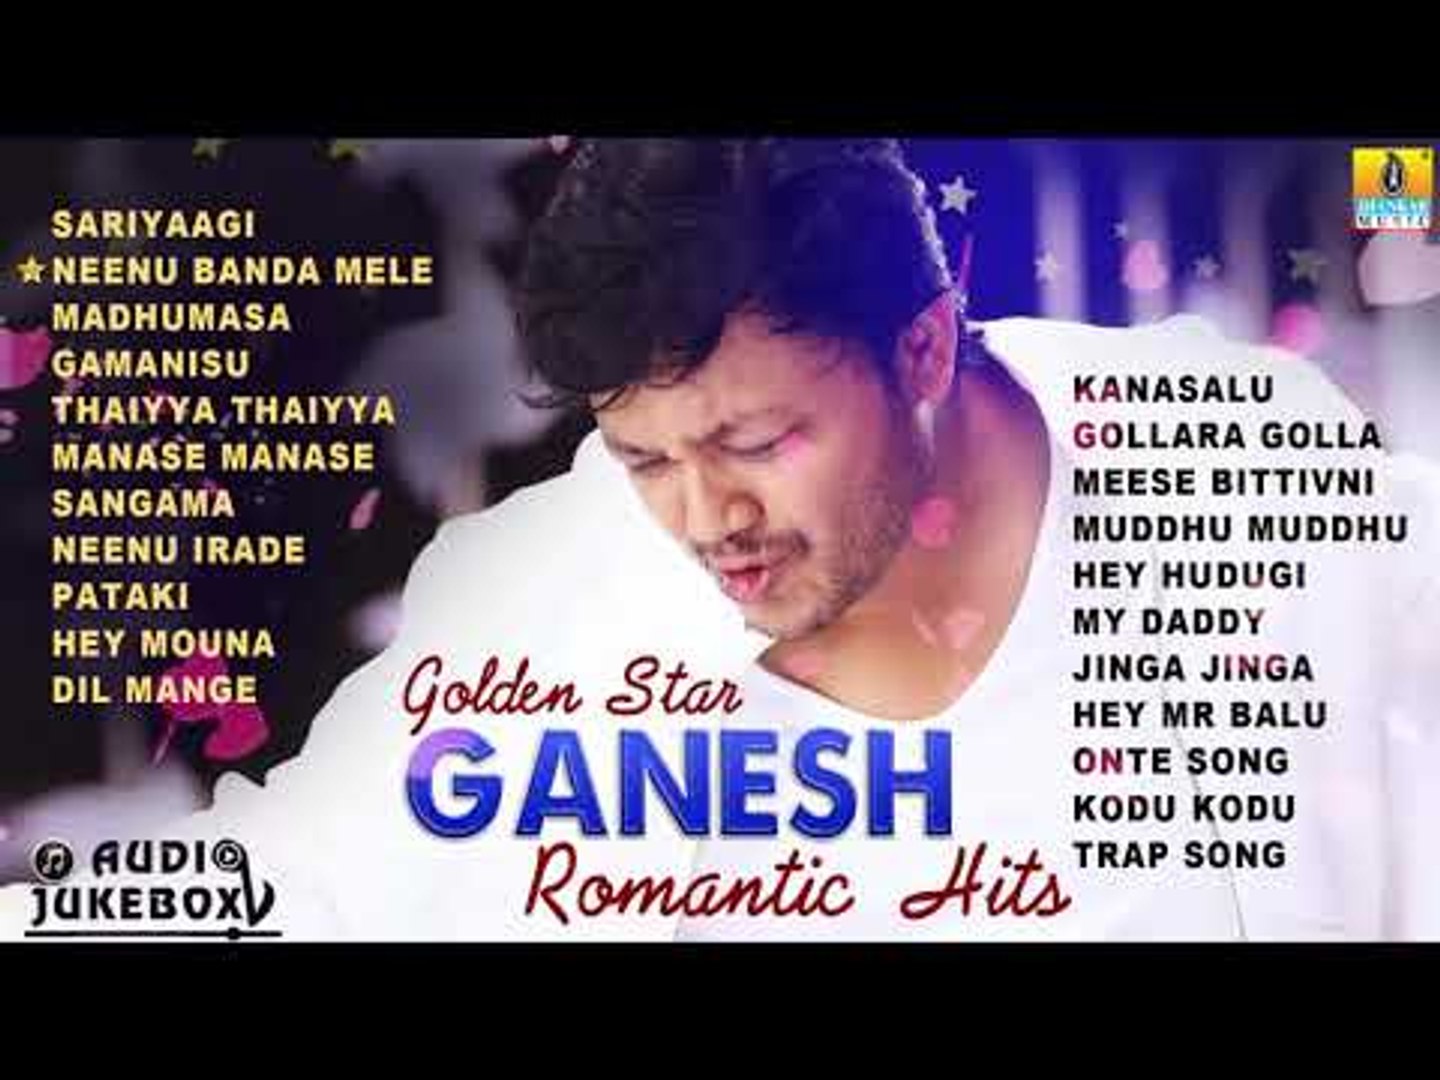 Golden Star Ganesh Romantic Hits Super Hit Kannada Songs Of Golden Star Ganesh Video Dailymotion Watch neenu irade official hd video making from mungaru male 2 exclusively on jhankar music.download and listen the songs extra bit codes of neenu irade. golden star ganesh romantic hits super hit kannada songs of golden star ganesh